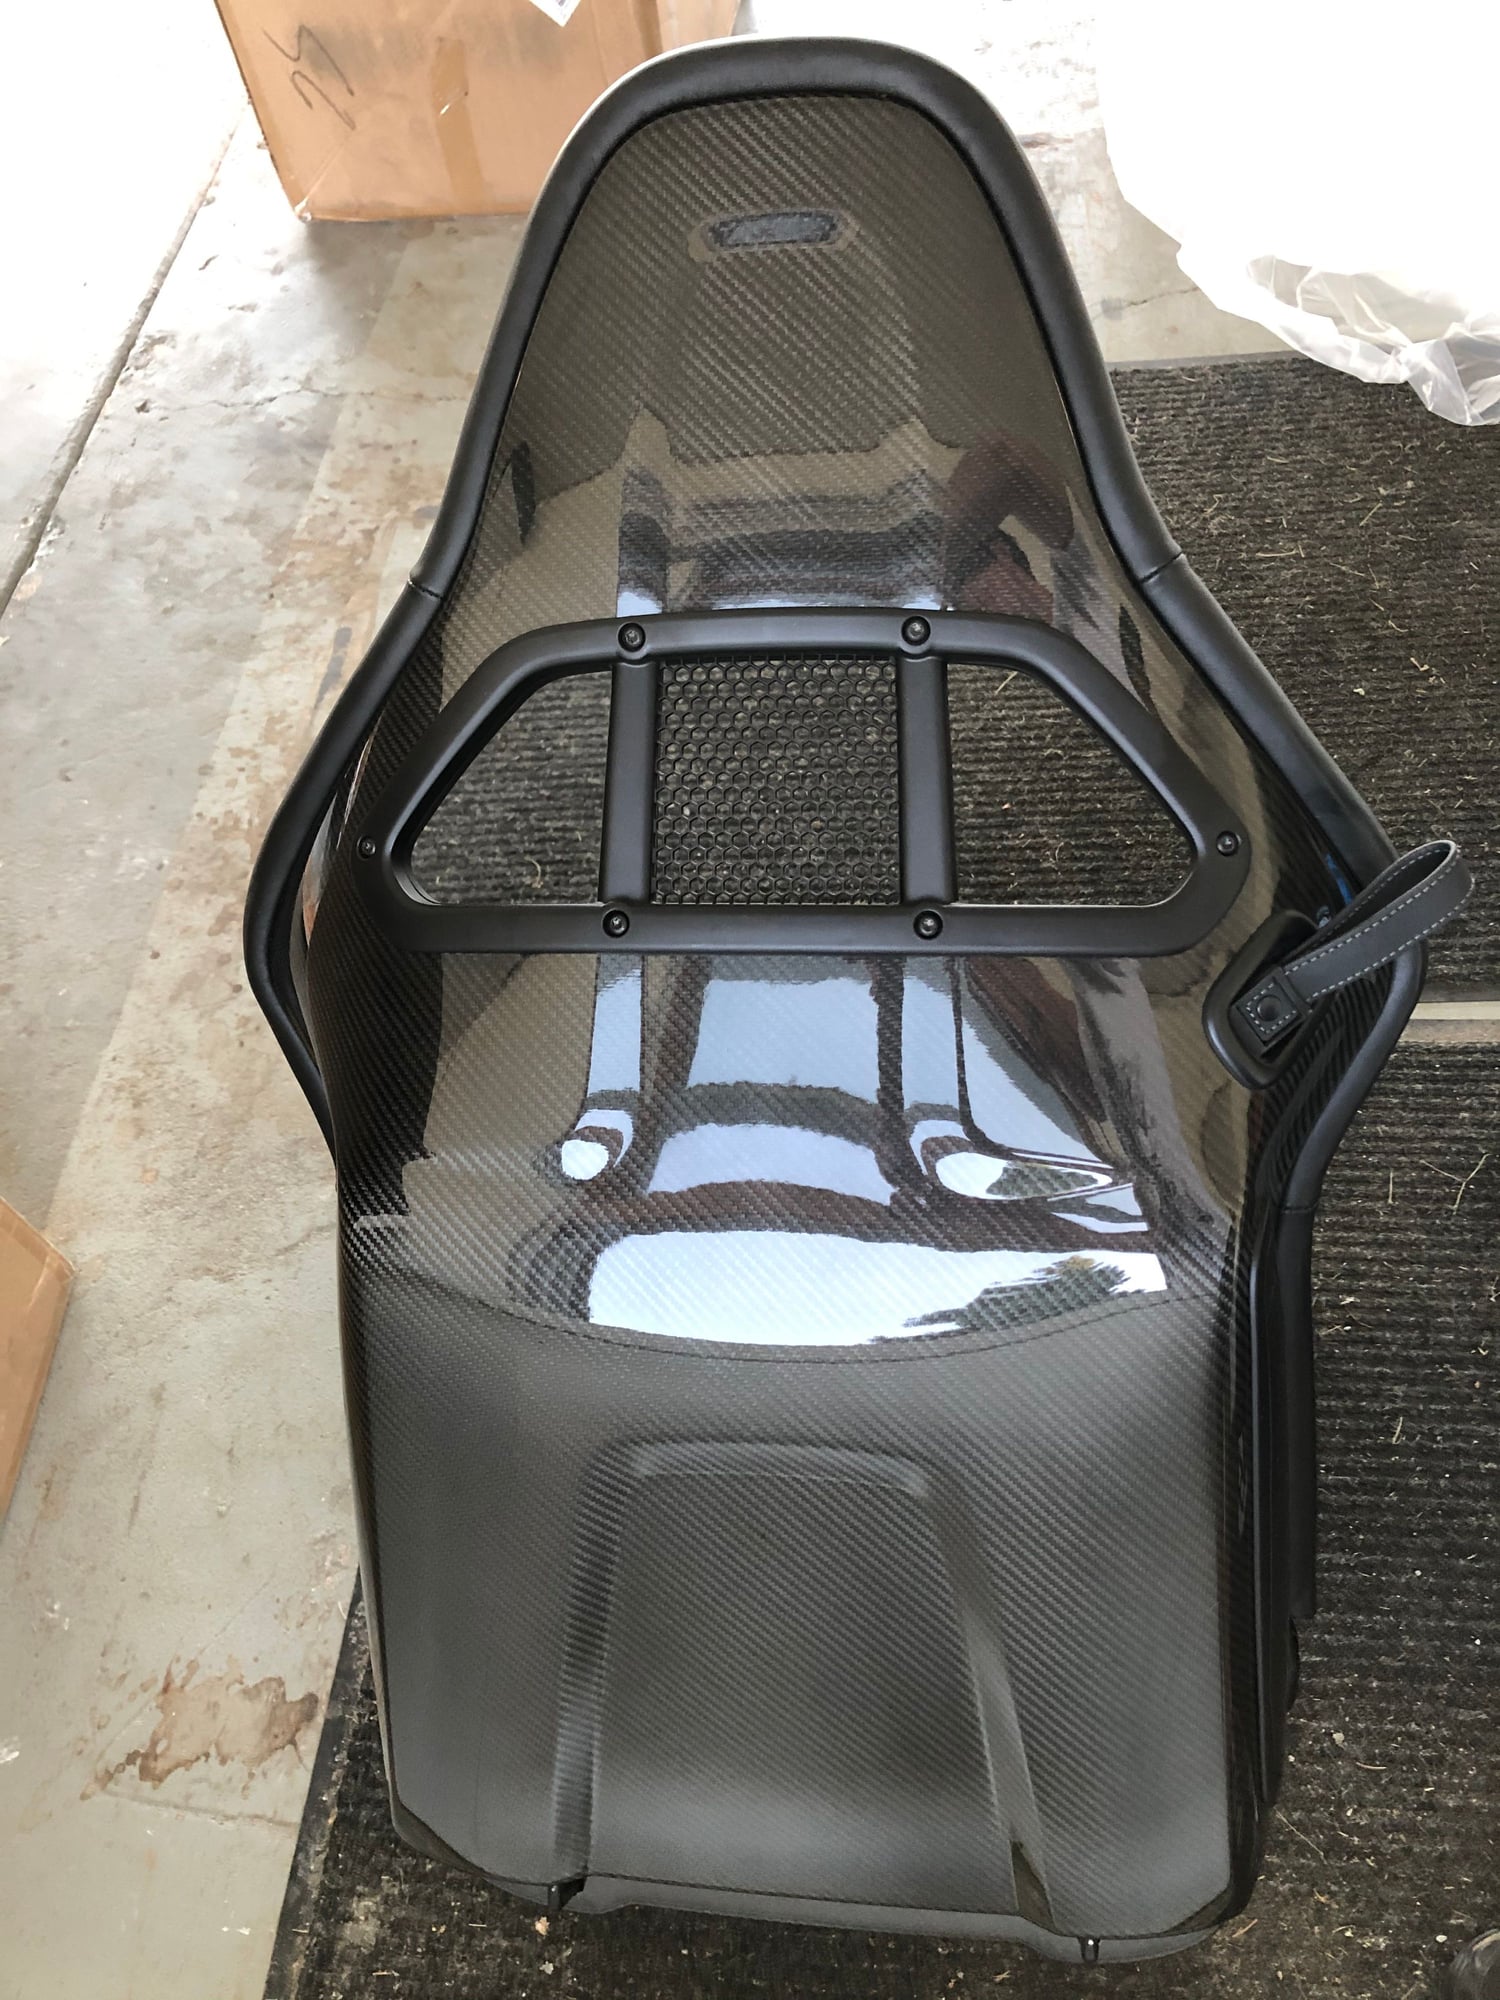 Interior/Upholstery - 997 GT2 Carbon Bucket Seats - Used - 2005 to 2011 Porsche GT2 - 2005 to 2011 Porsche GT3 - 2005 to 2011 Porsche Carrera - Downers Grove, IL 60516, United States